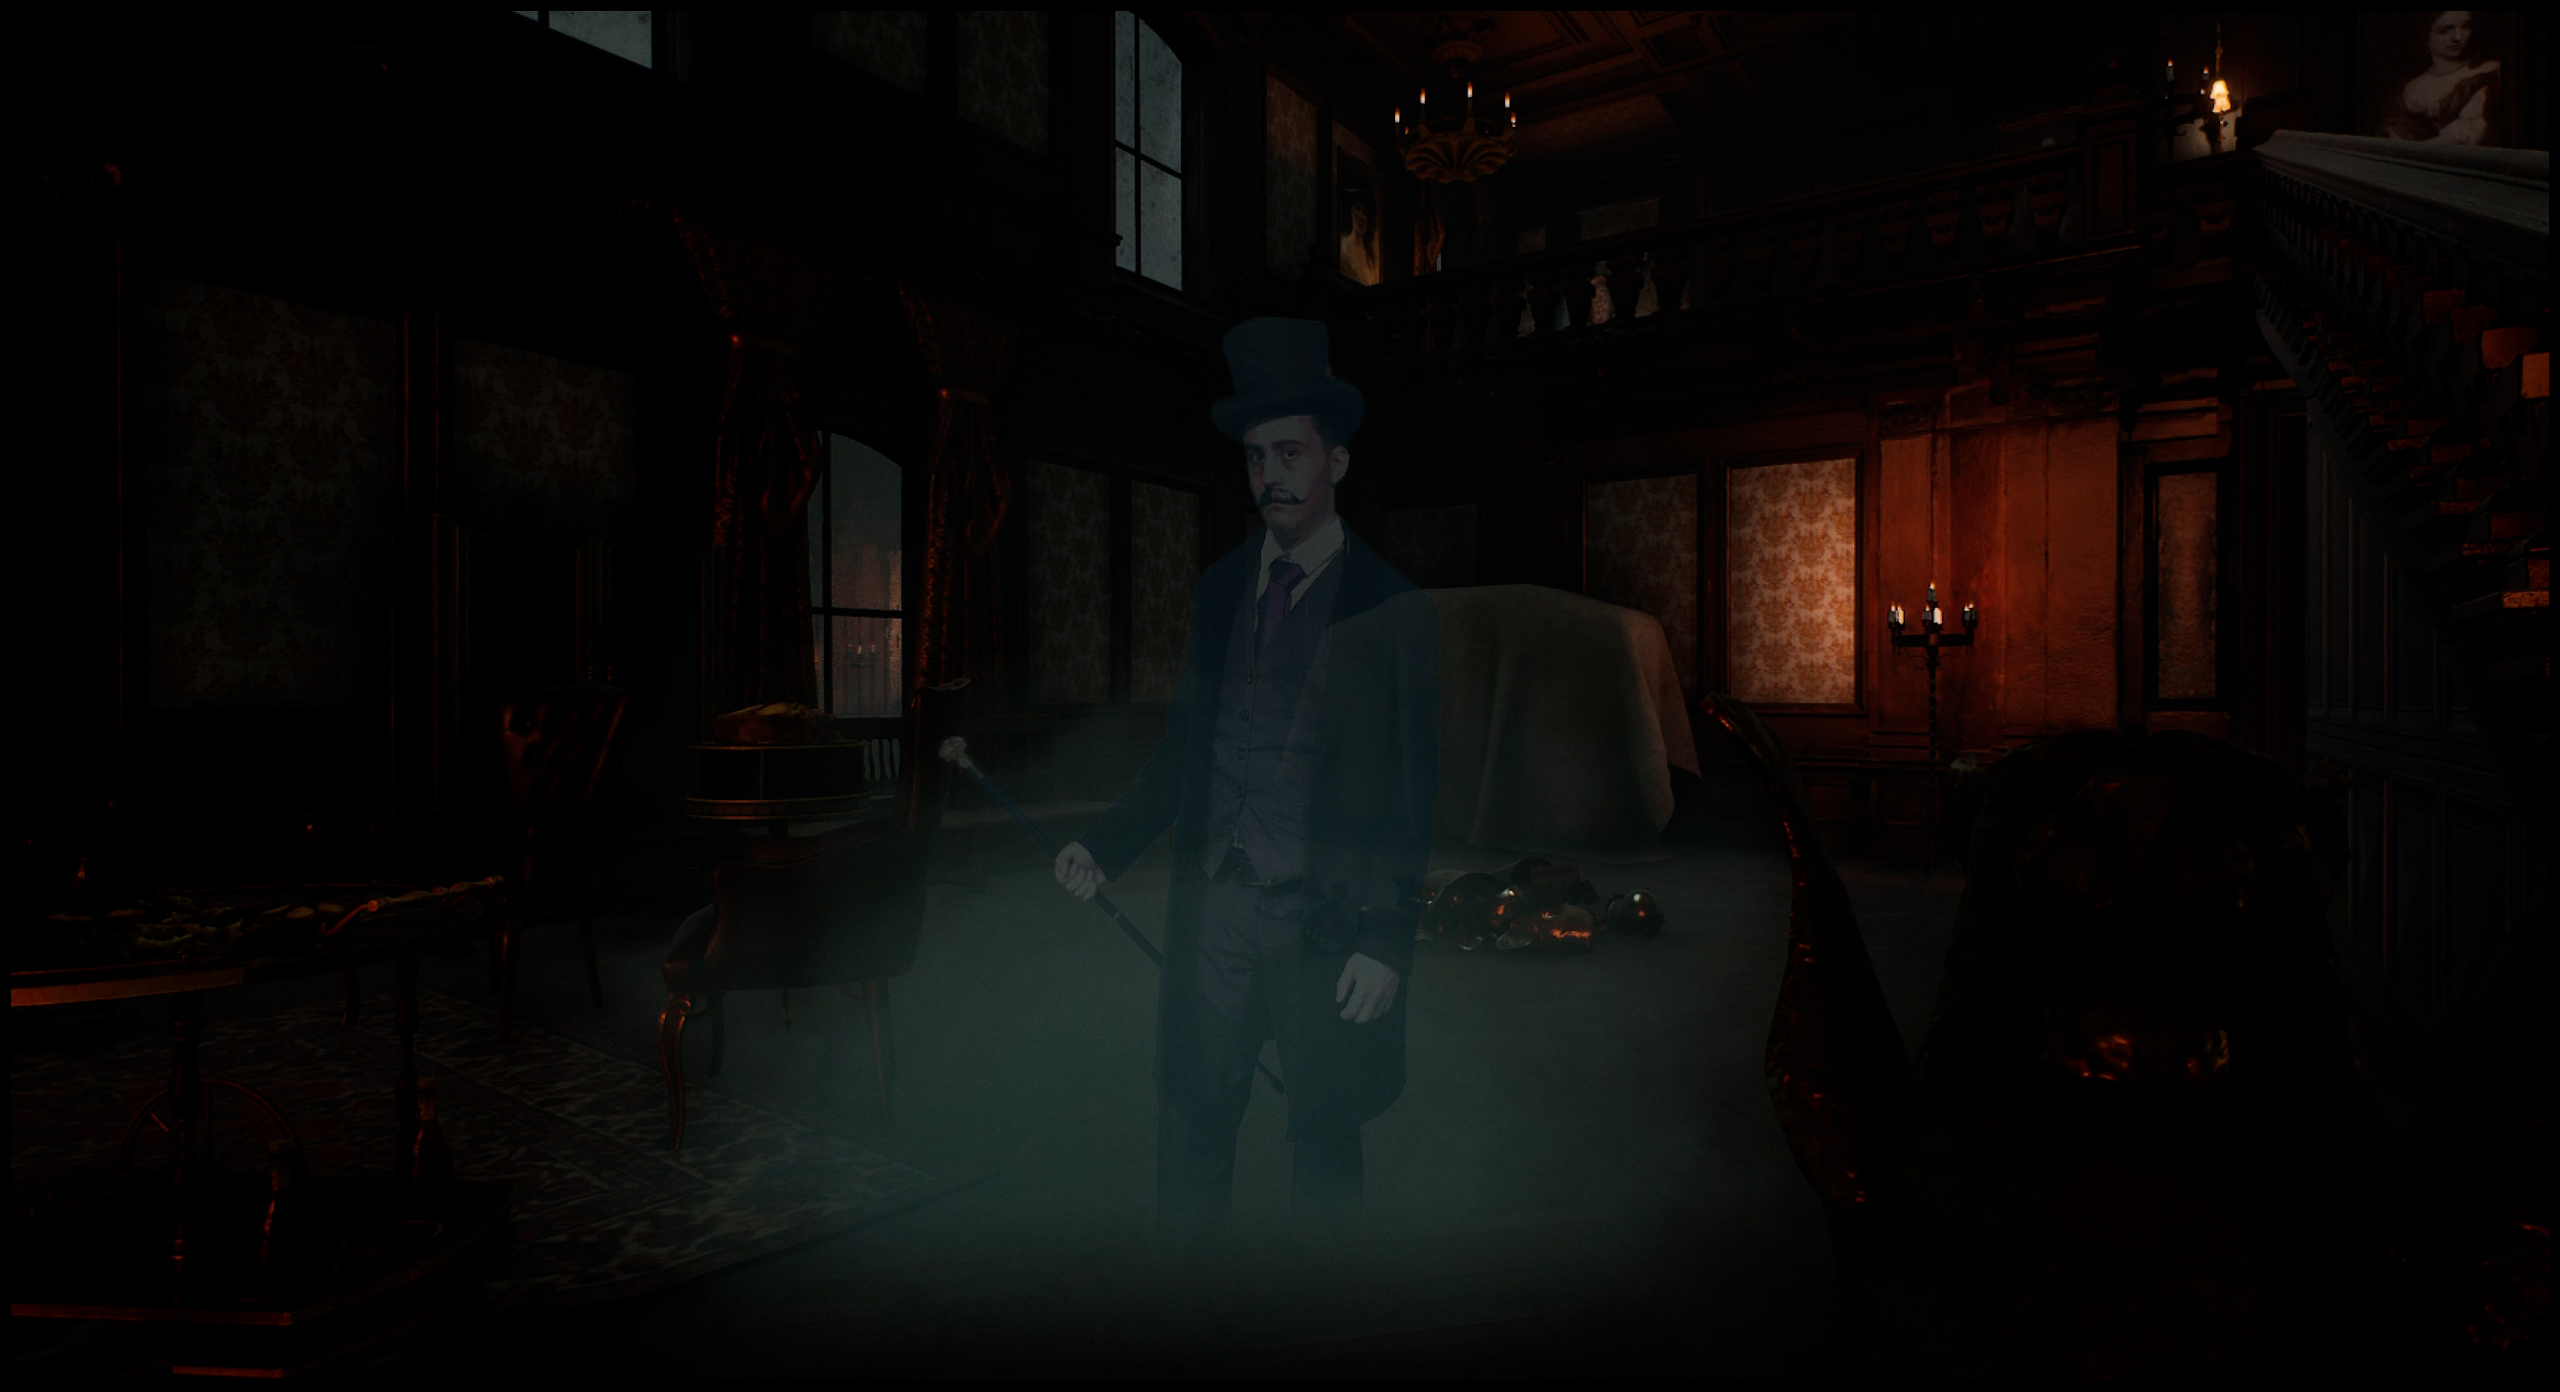 Players can see the ghost through their VR headsets as part of the virtual environment.